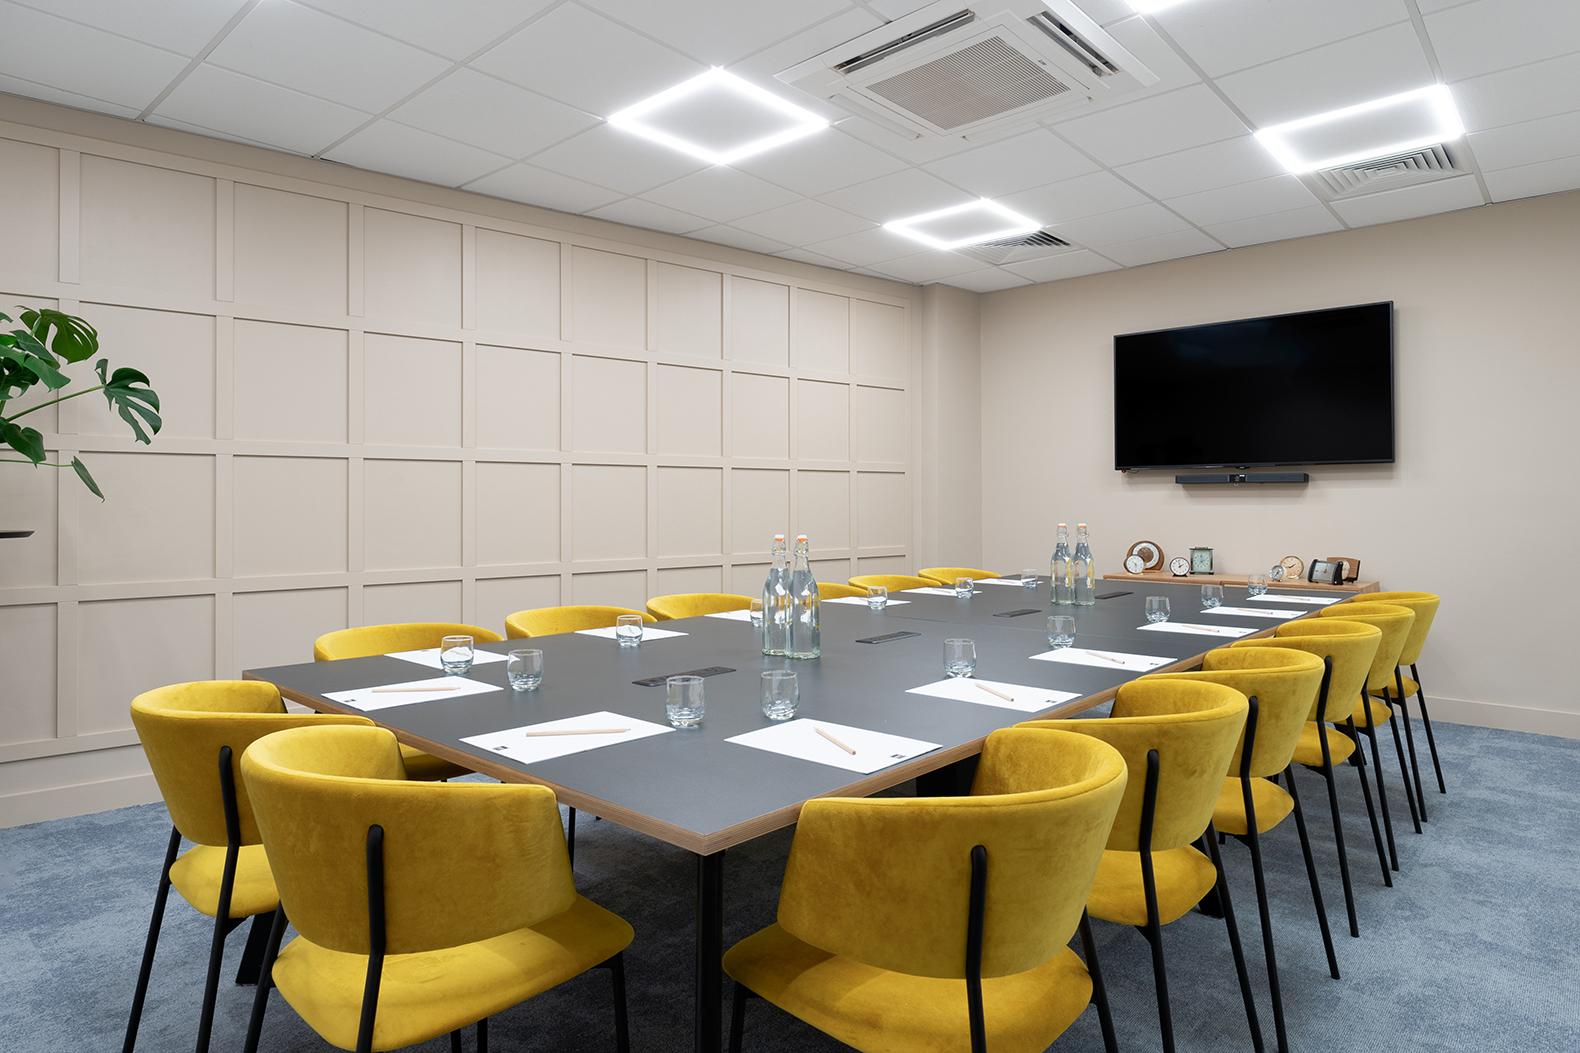 About-Time Boardroom, Hampton By Hilton Torquay photo #1